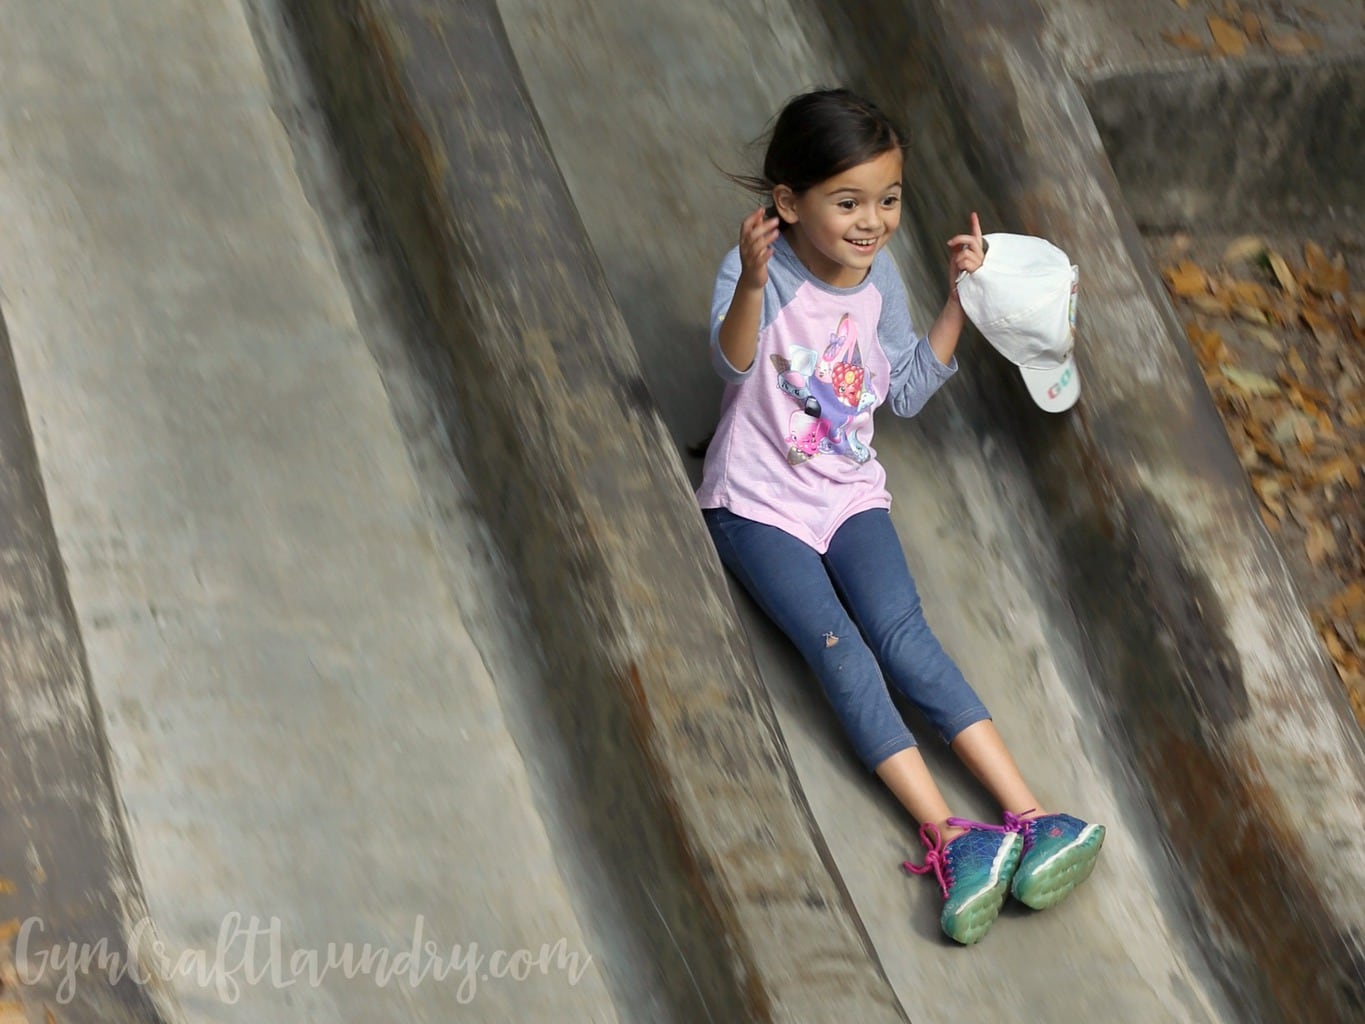 Girl sliding down the slide while playing outdoors.